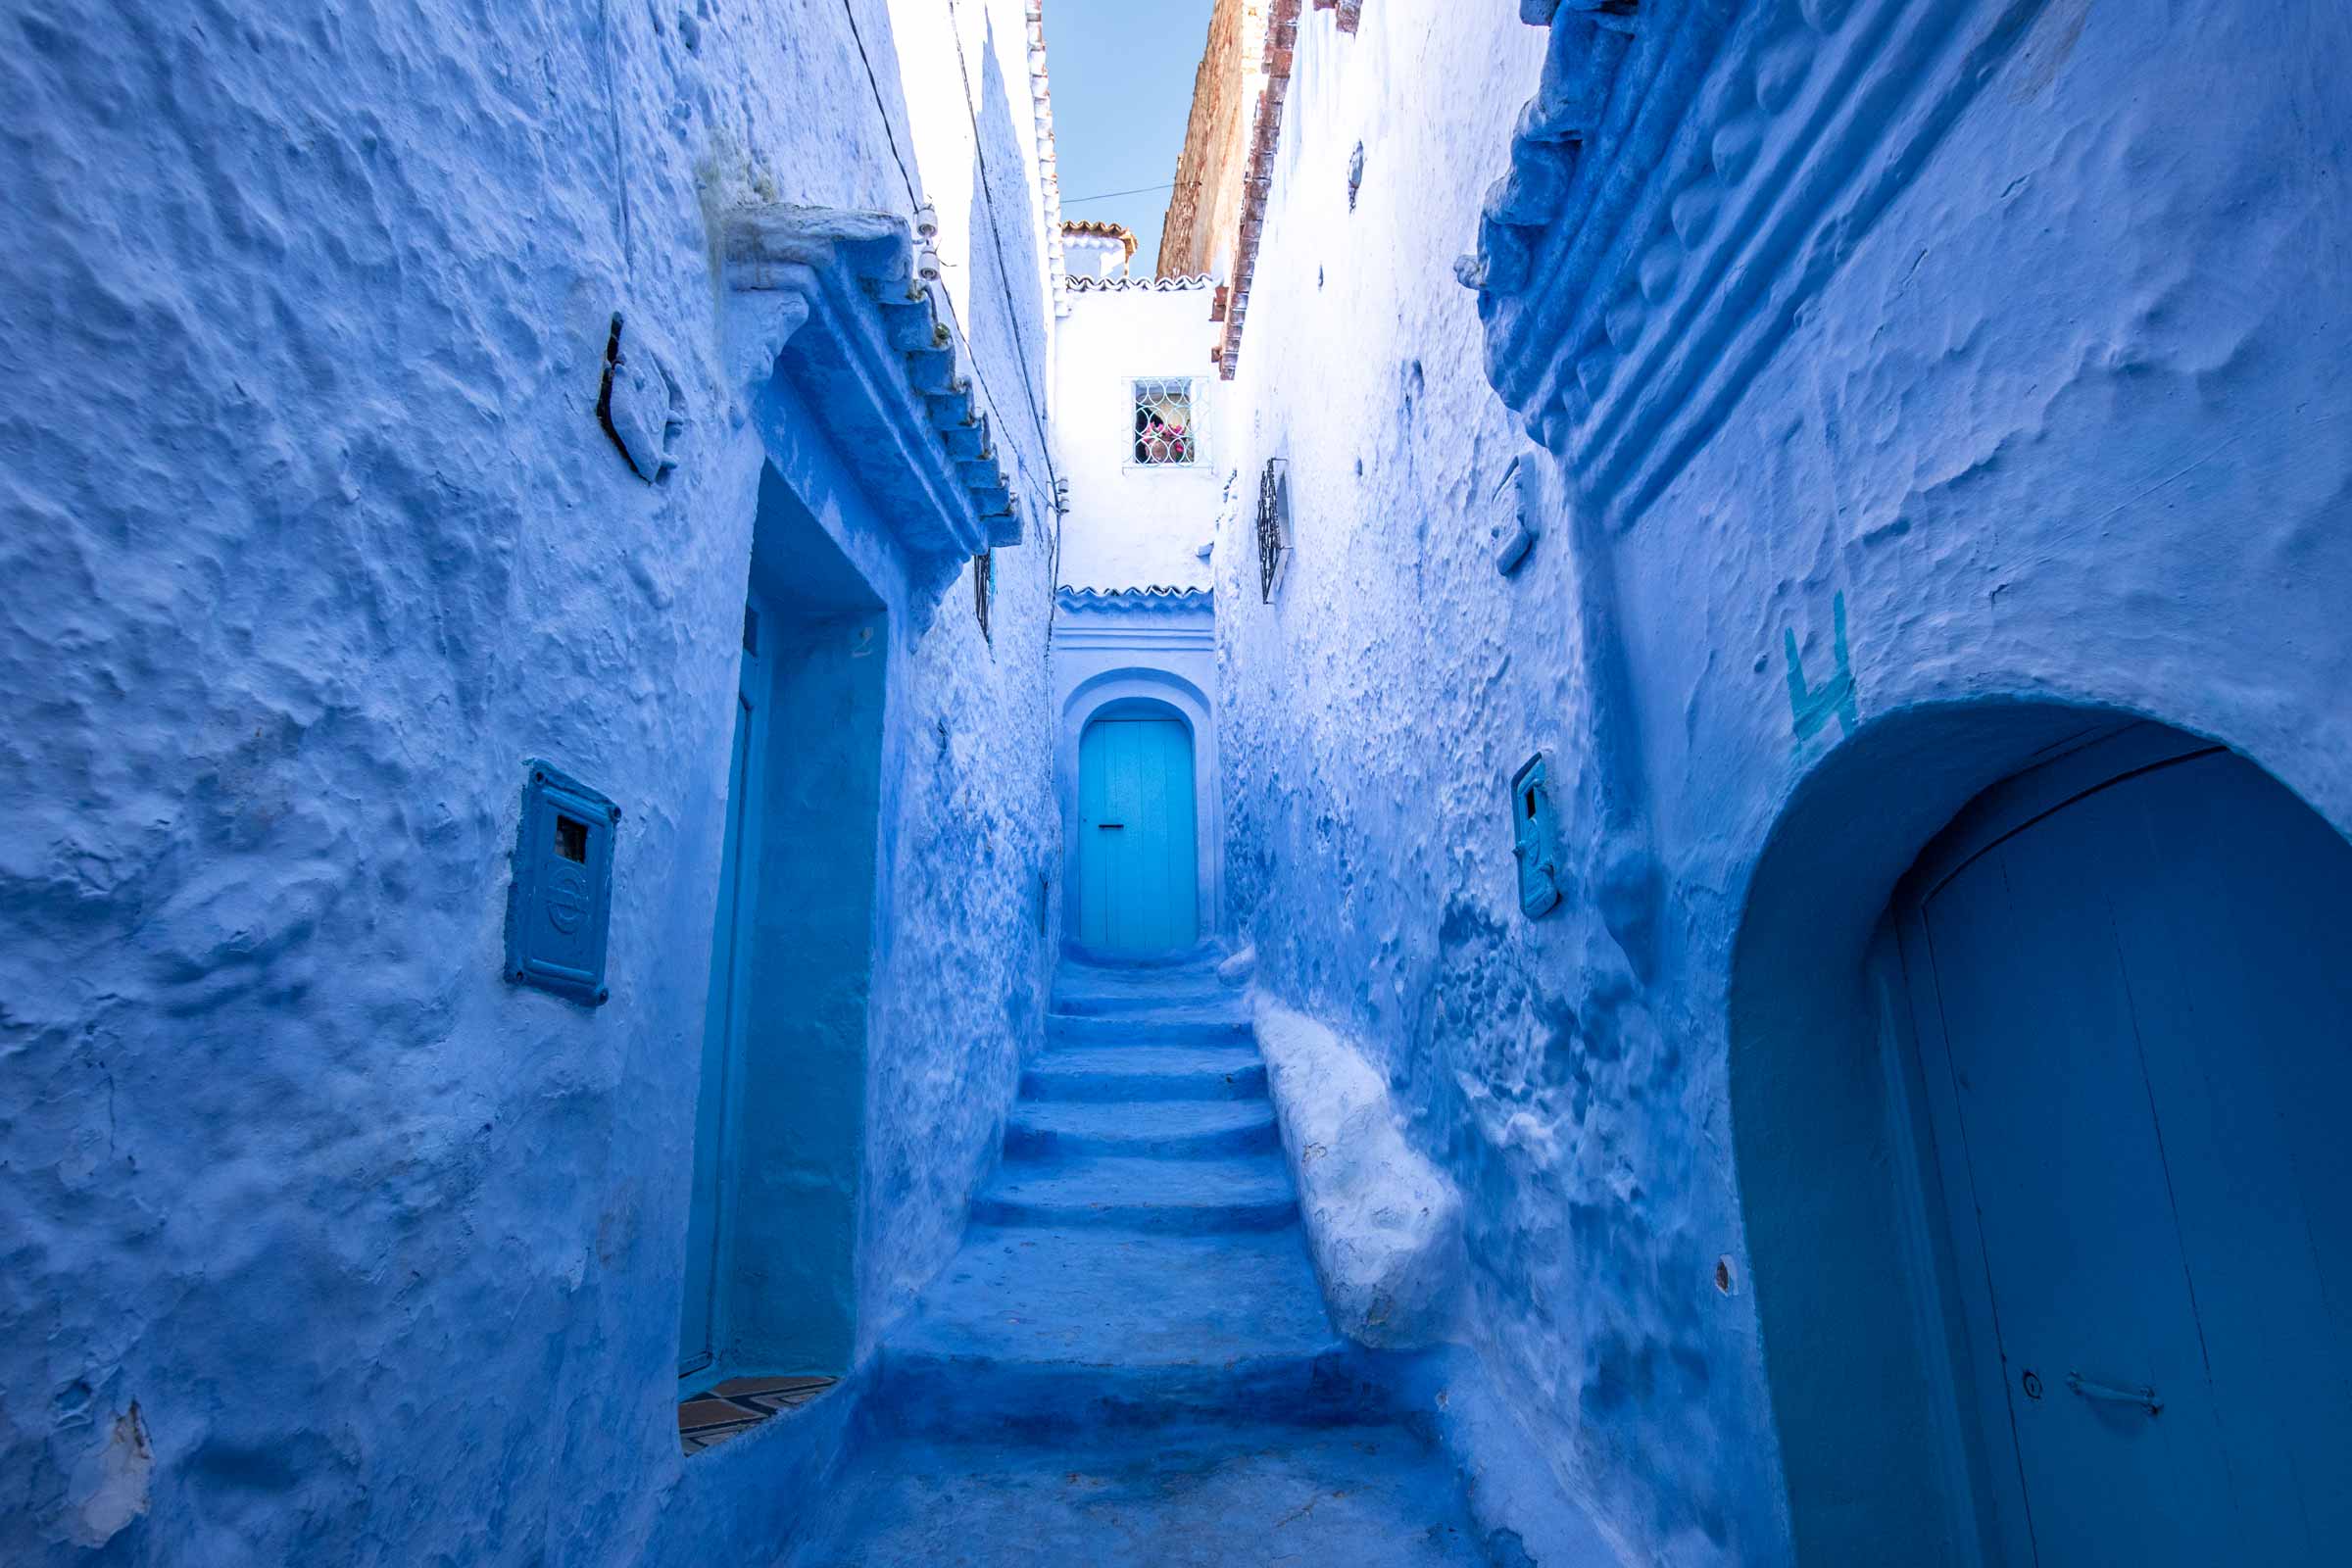 The Best of The Blue – a Chefchaouen Photo Guide